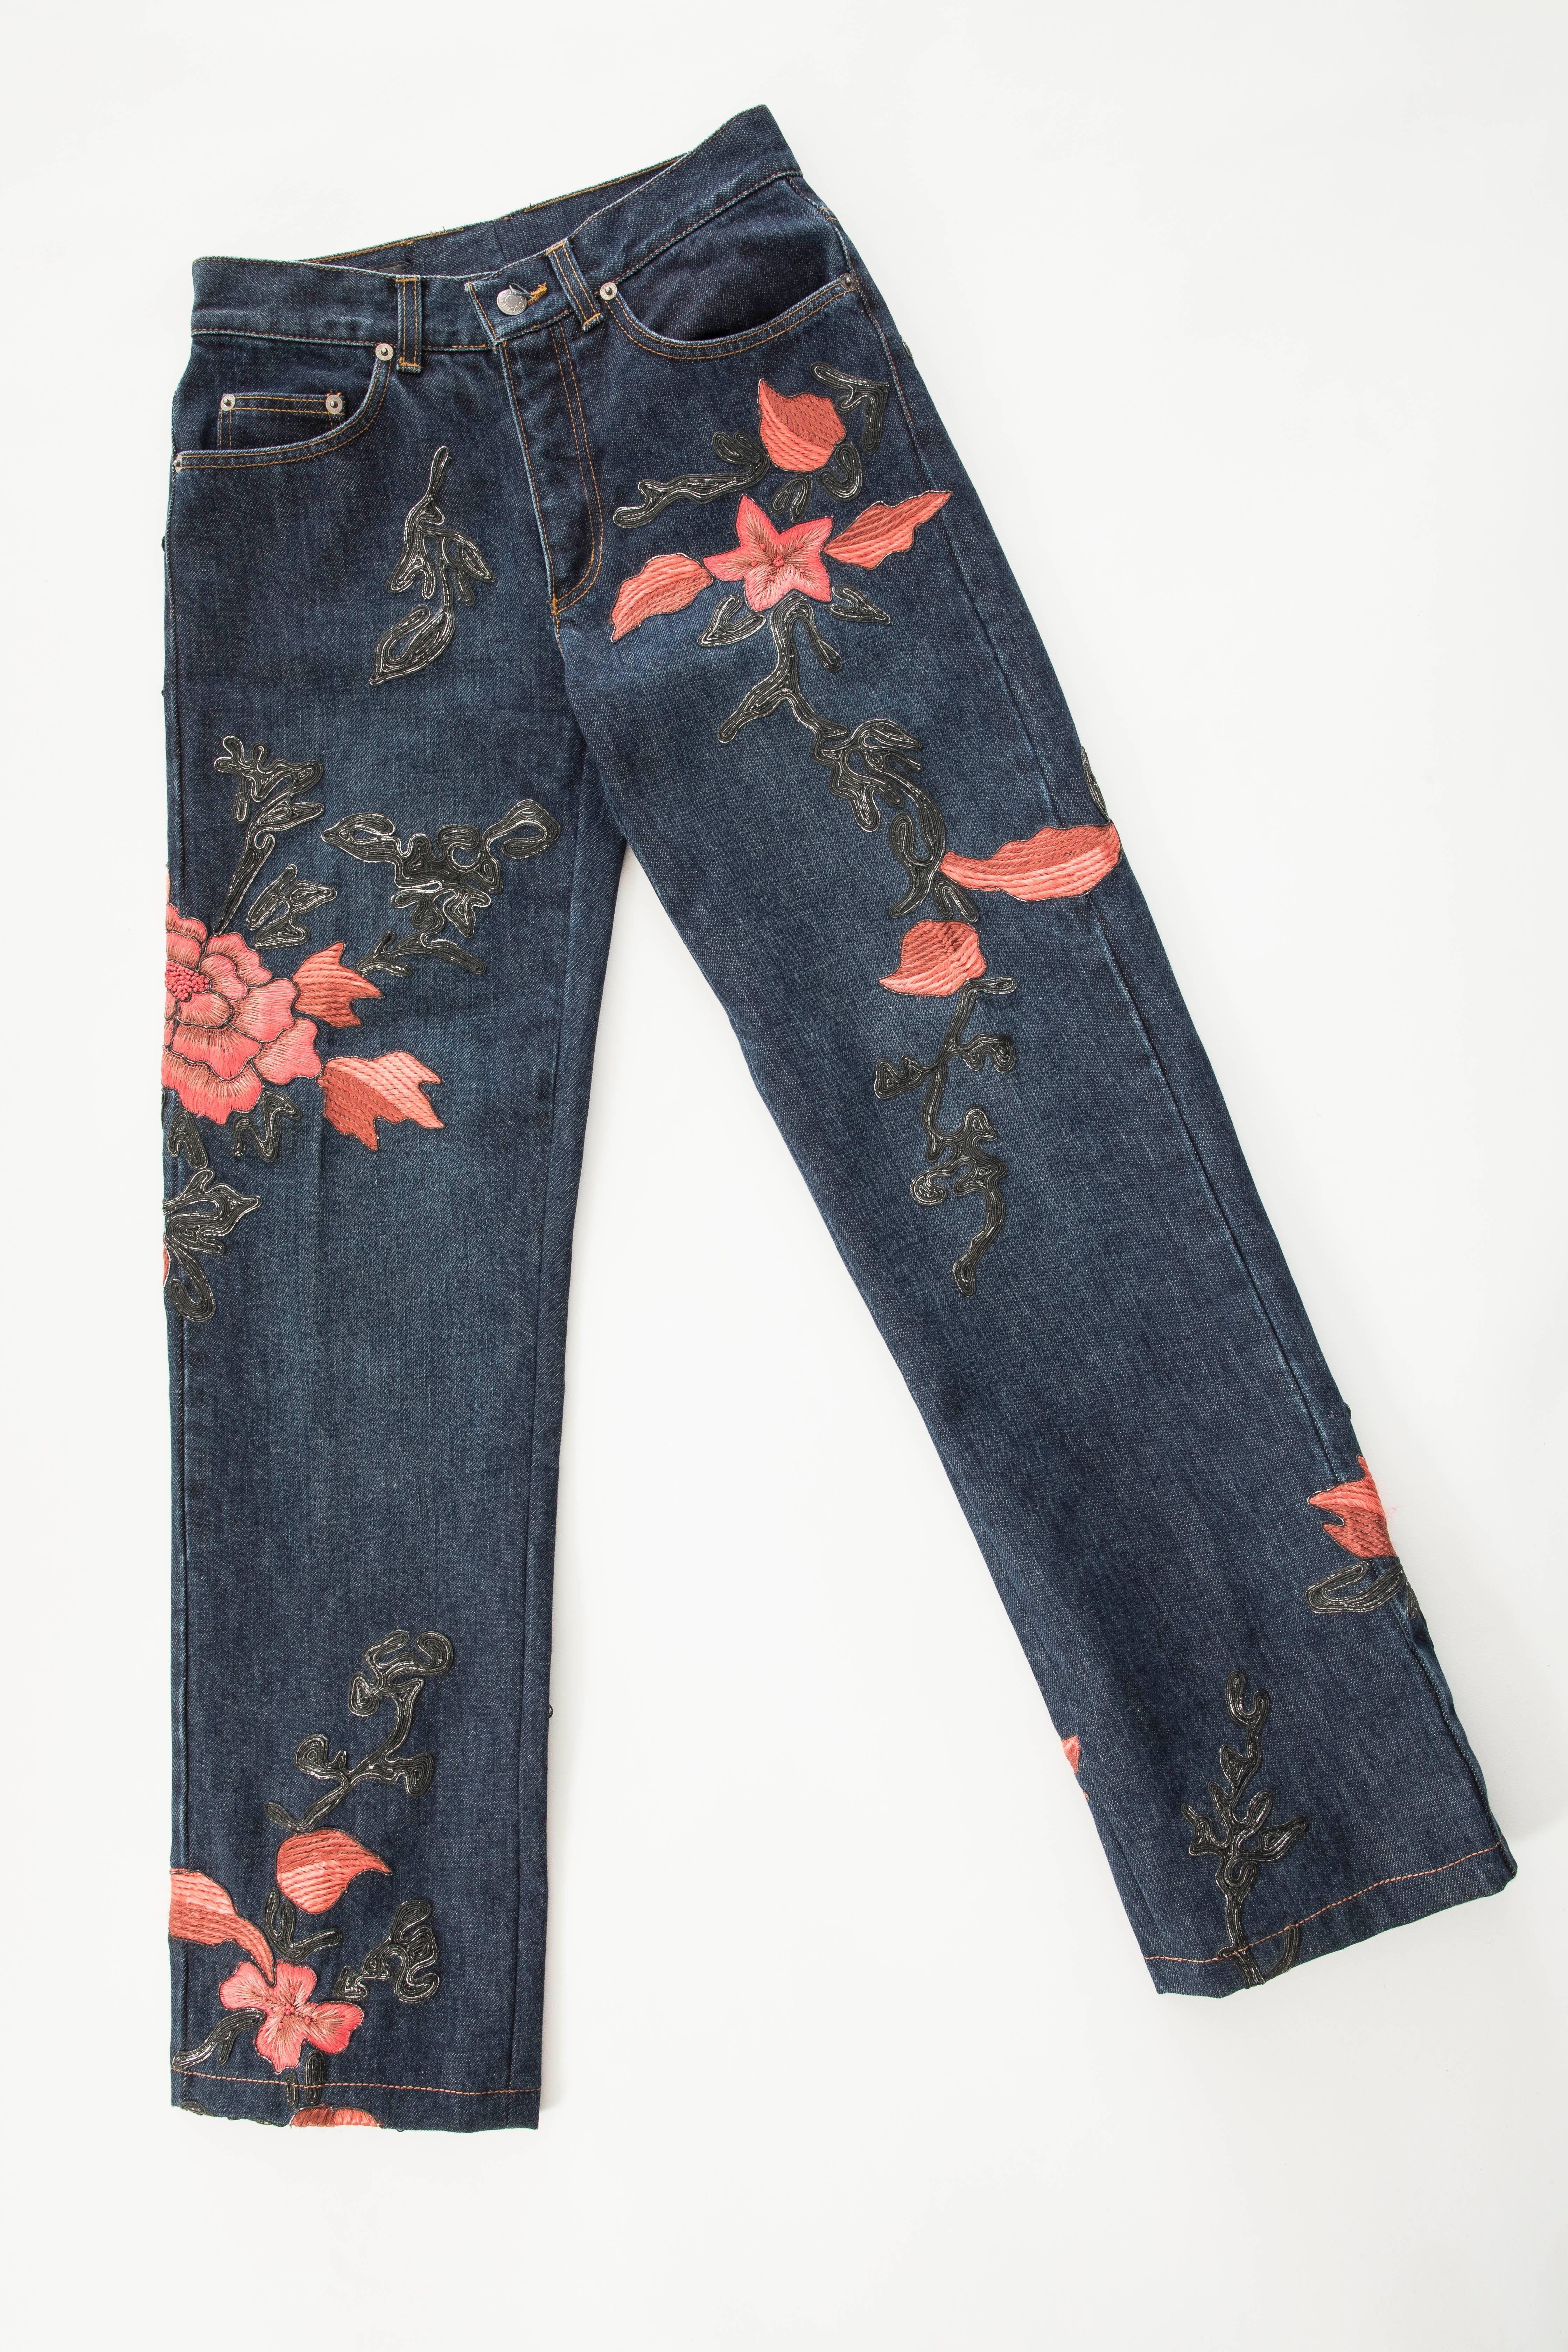 Tom Ford for Gucci, Autumn-Winter 1999, floral embroidered men's denim jeans with five pockets, gunmetal-tone hardware, belt loops, leather logo at back and contrast stitching and signature button fly closures.

IT. 38, US. X-Small
Waist 28, Hips